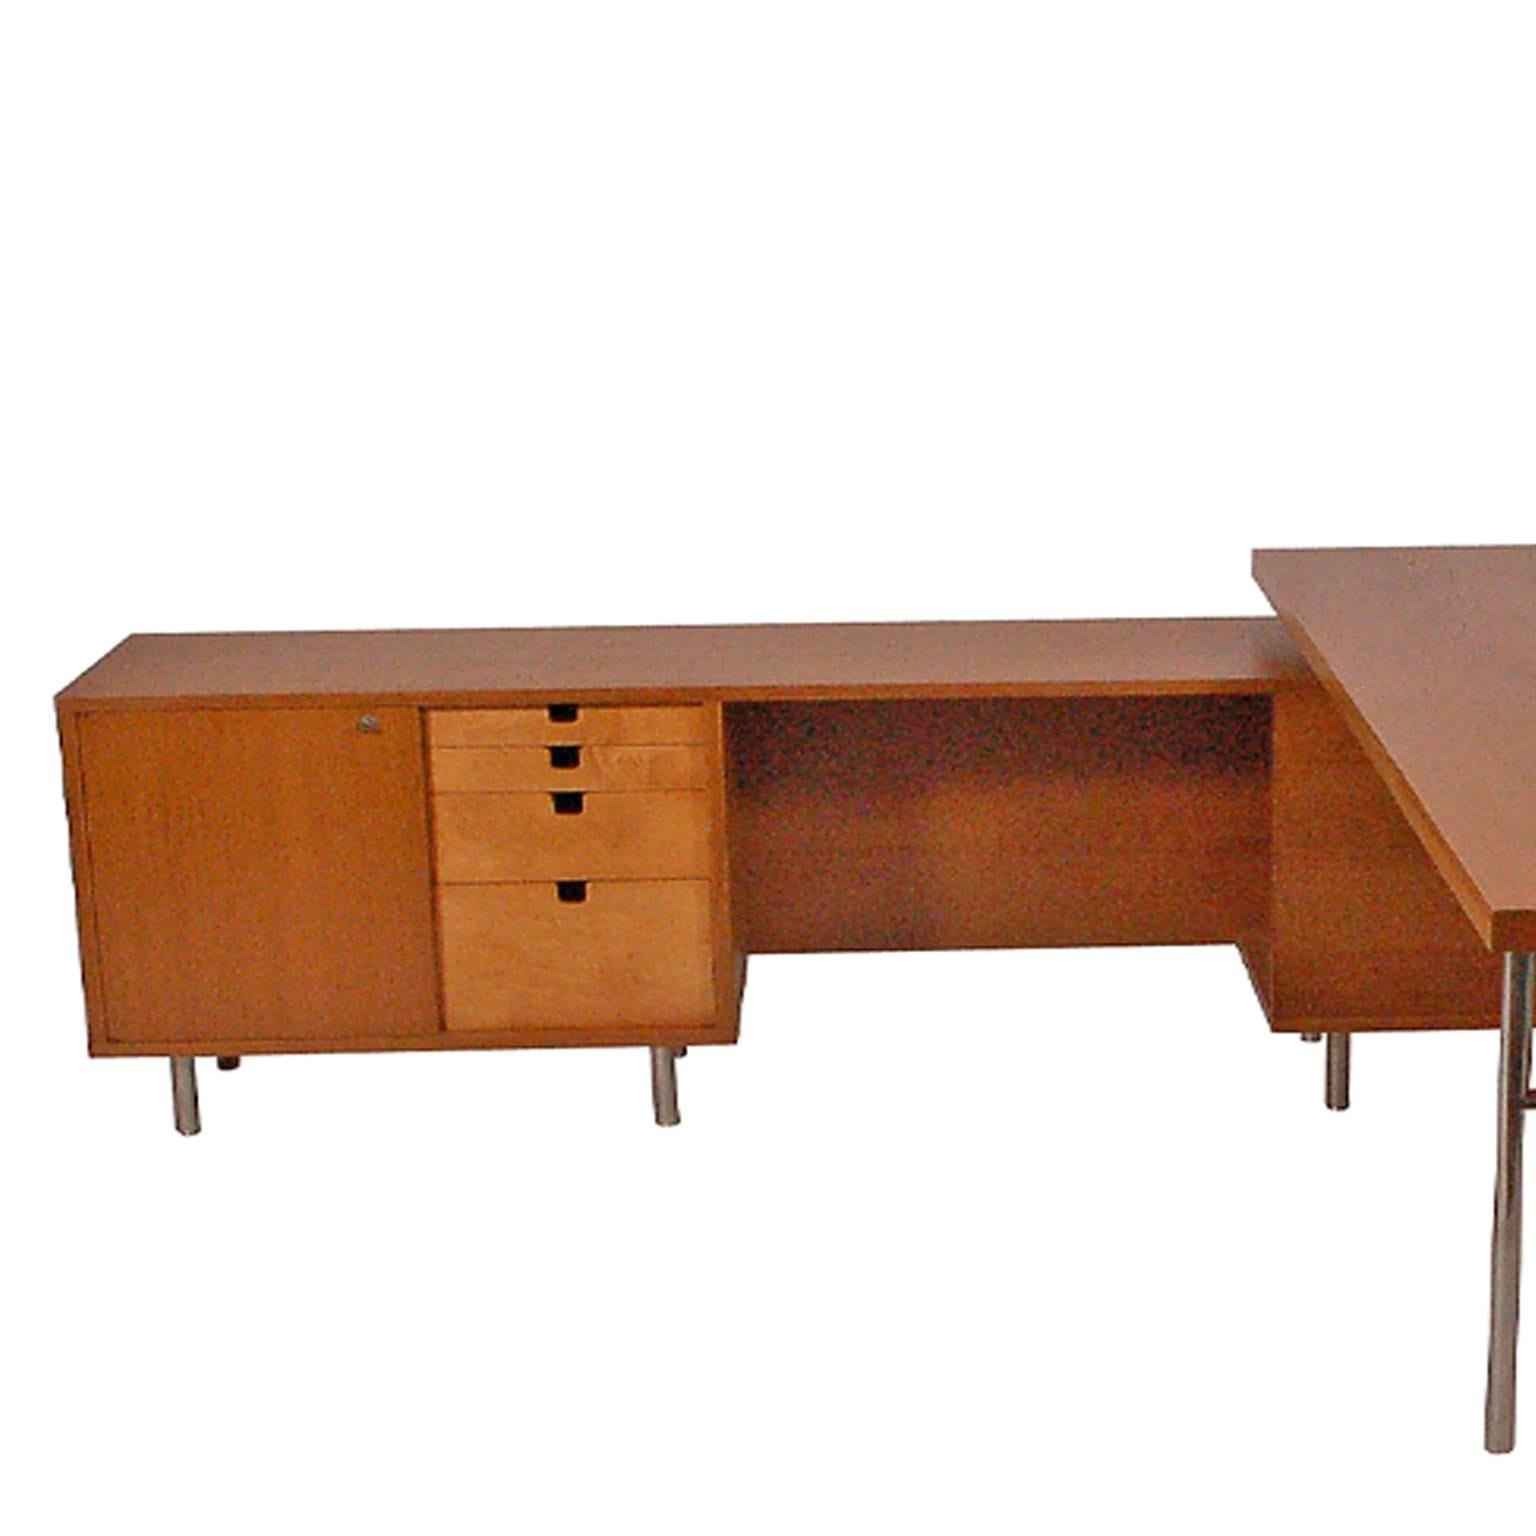 Executive Office Group Desk by George Nelson 1952 for Herman Miller 1